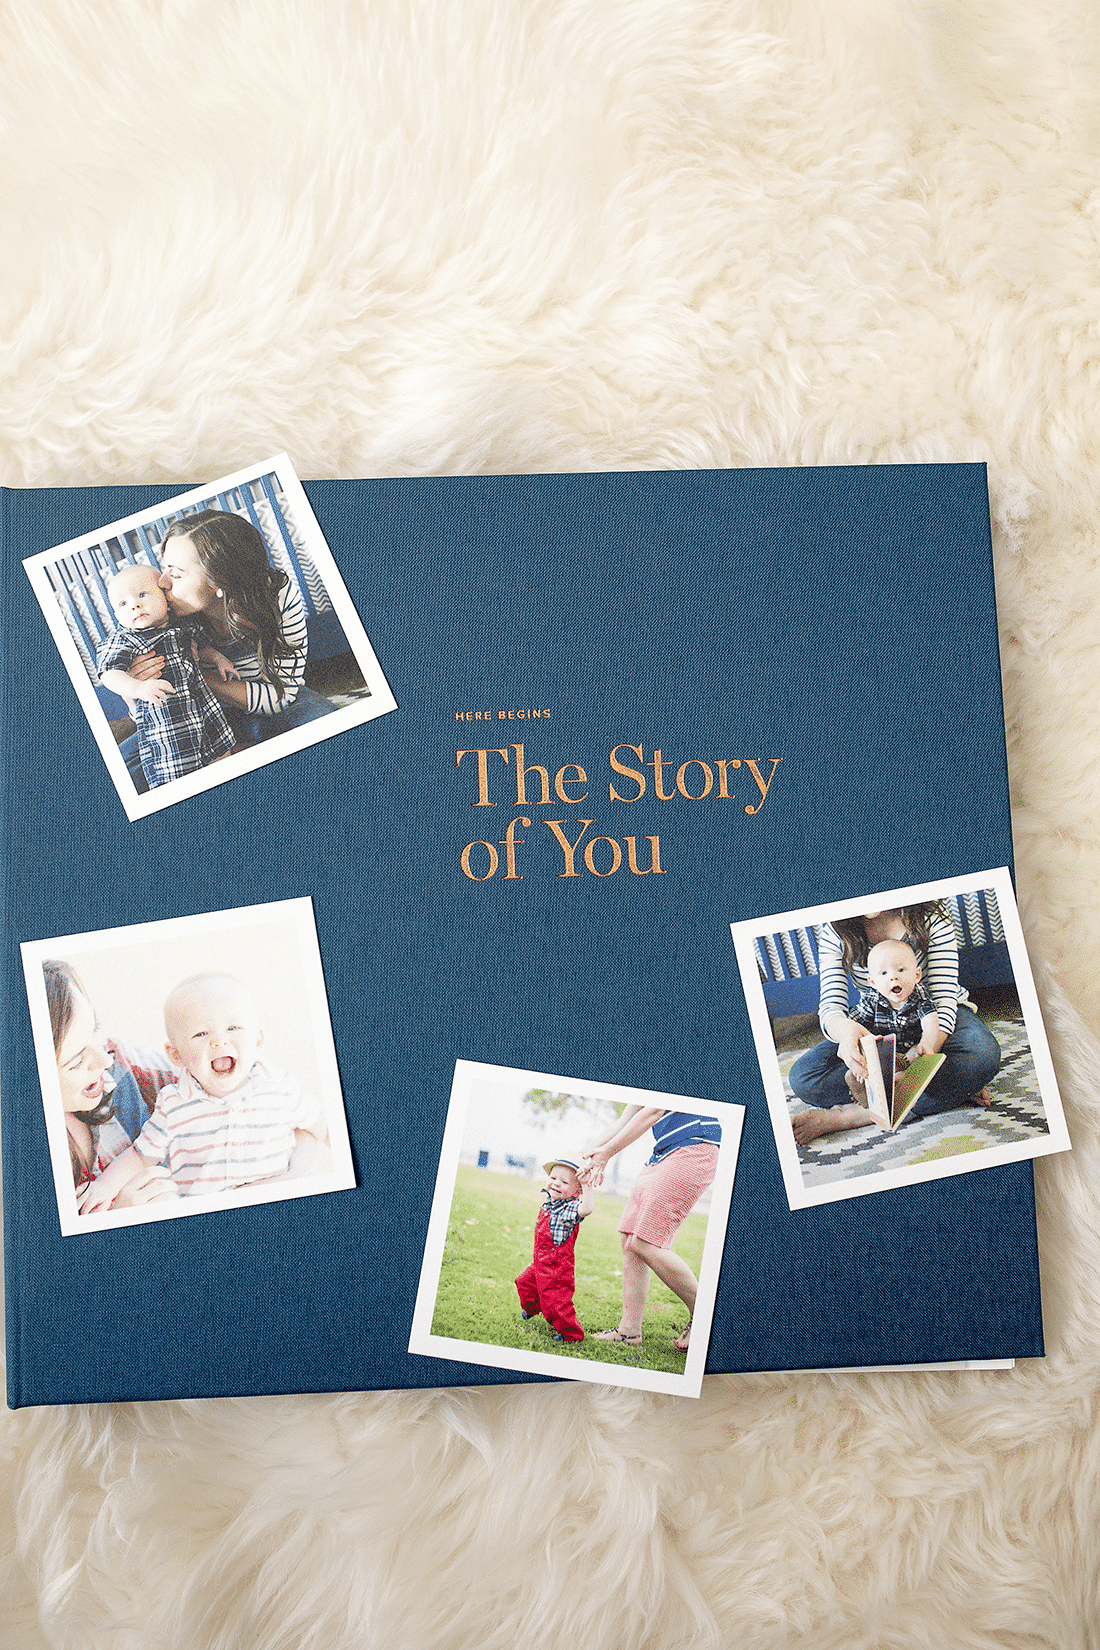 the perfect baby book: this modern baby book is so well designed, and is an easy baby book idea that helps preserve those little memories perfectly!